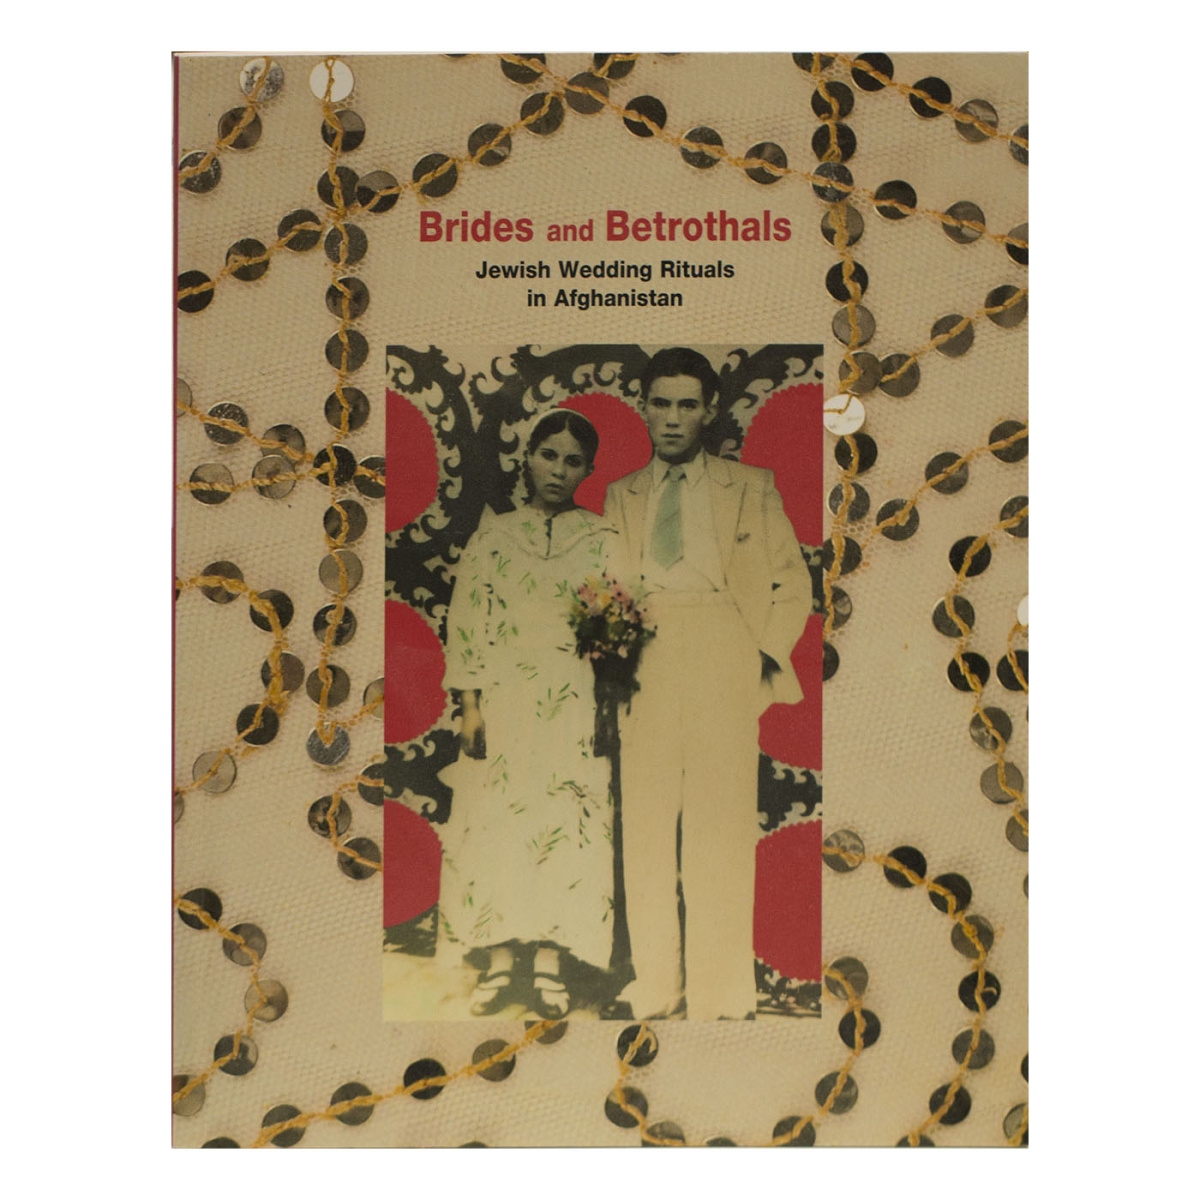  Brides and Betrothals: Jewish Wedding Rituals in Afghanistan (Softcover) - 1